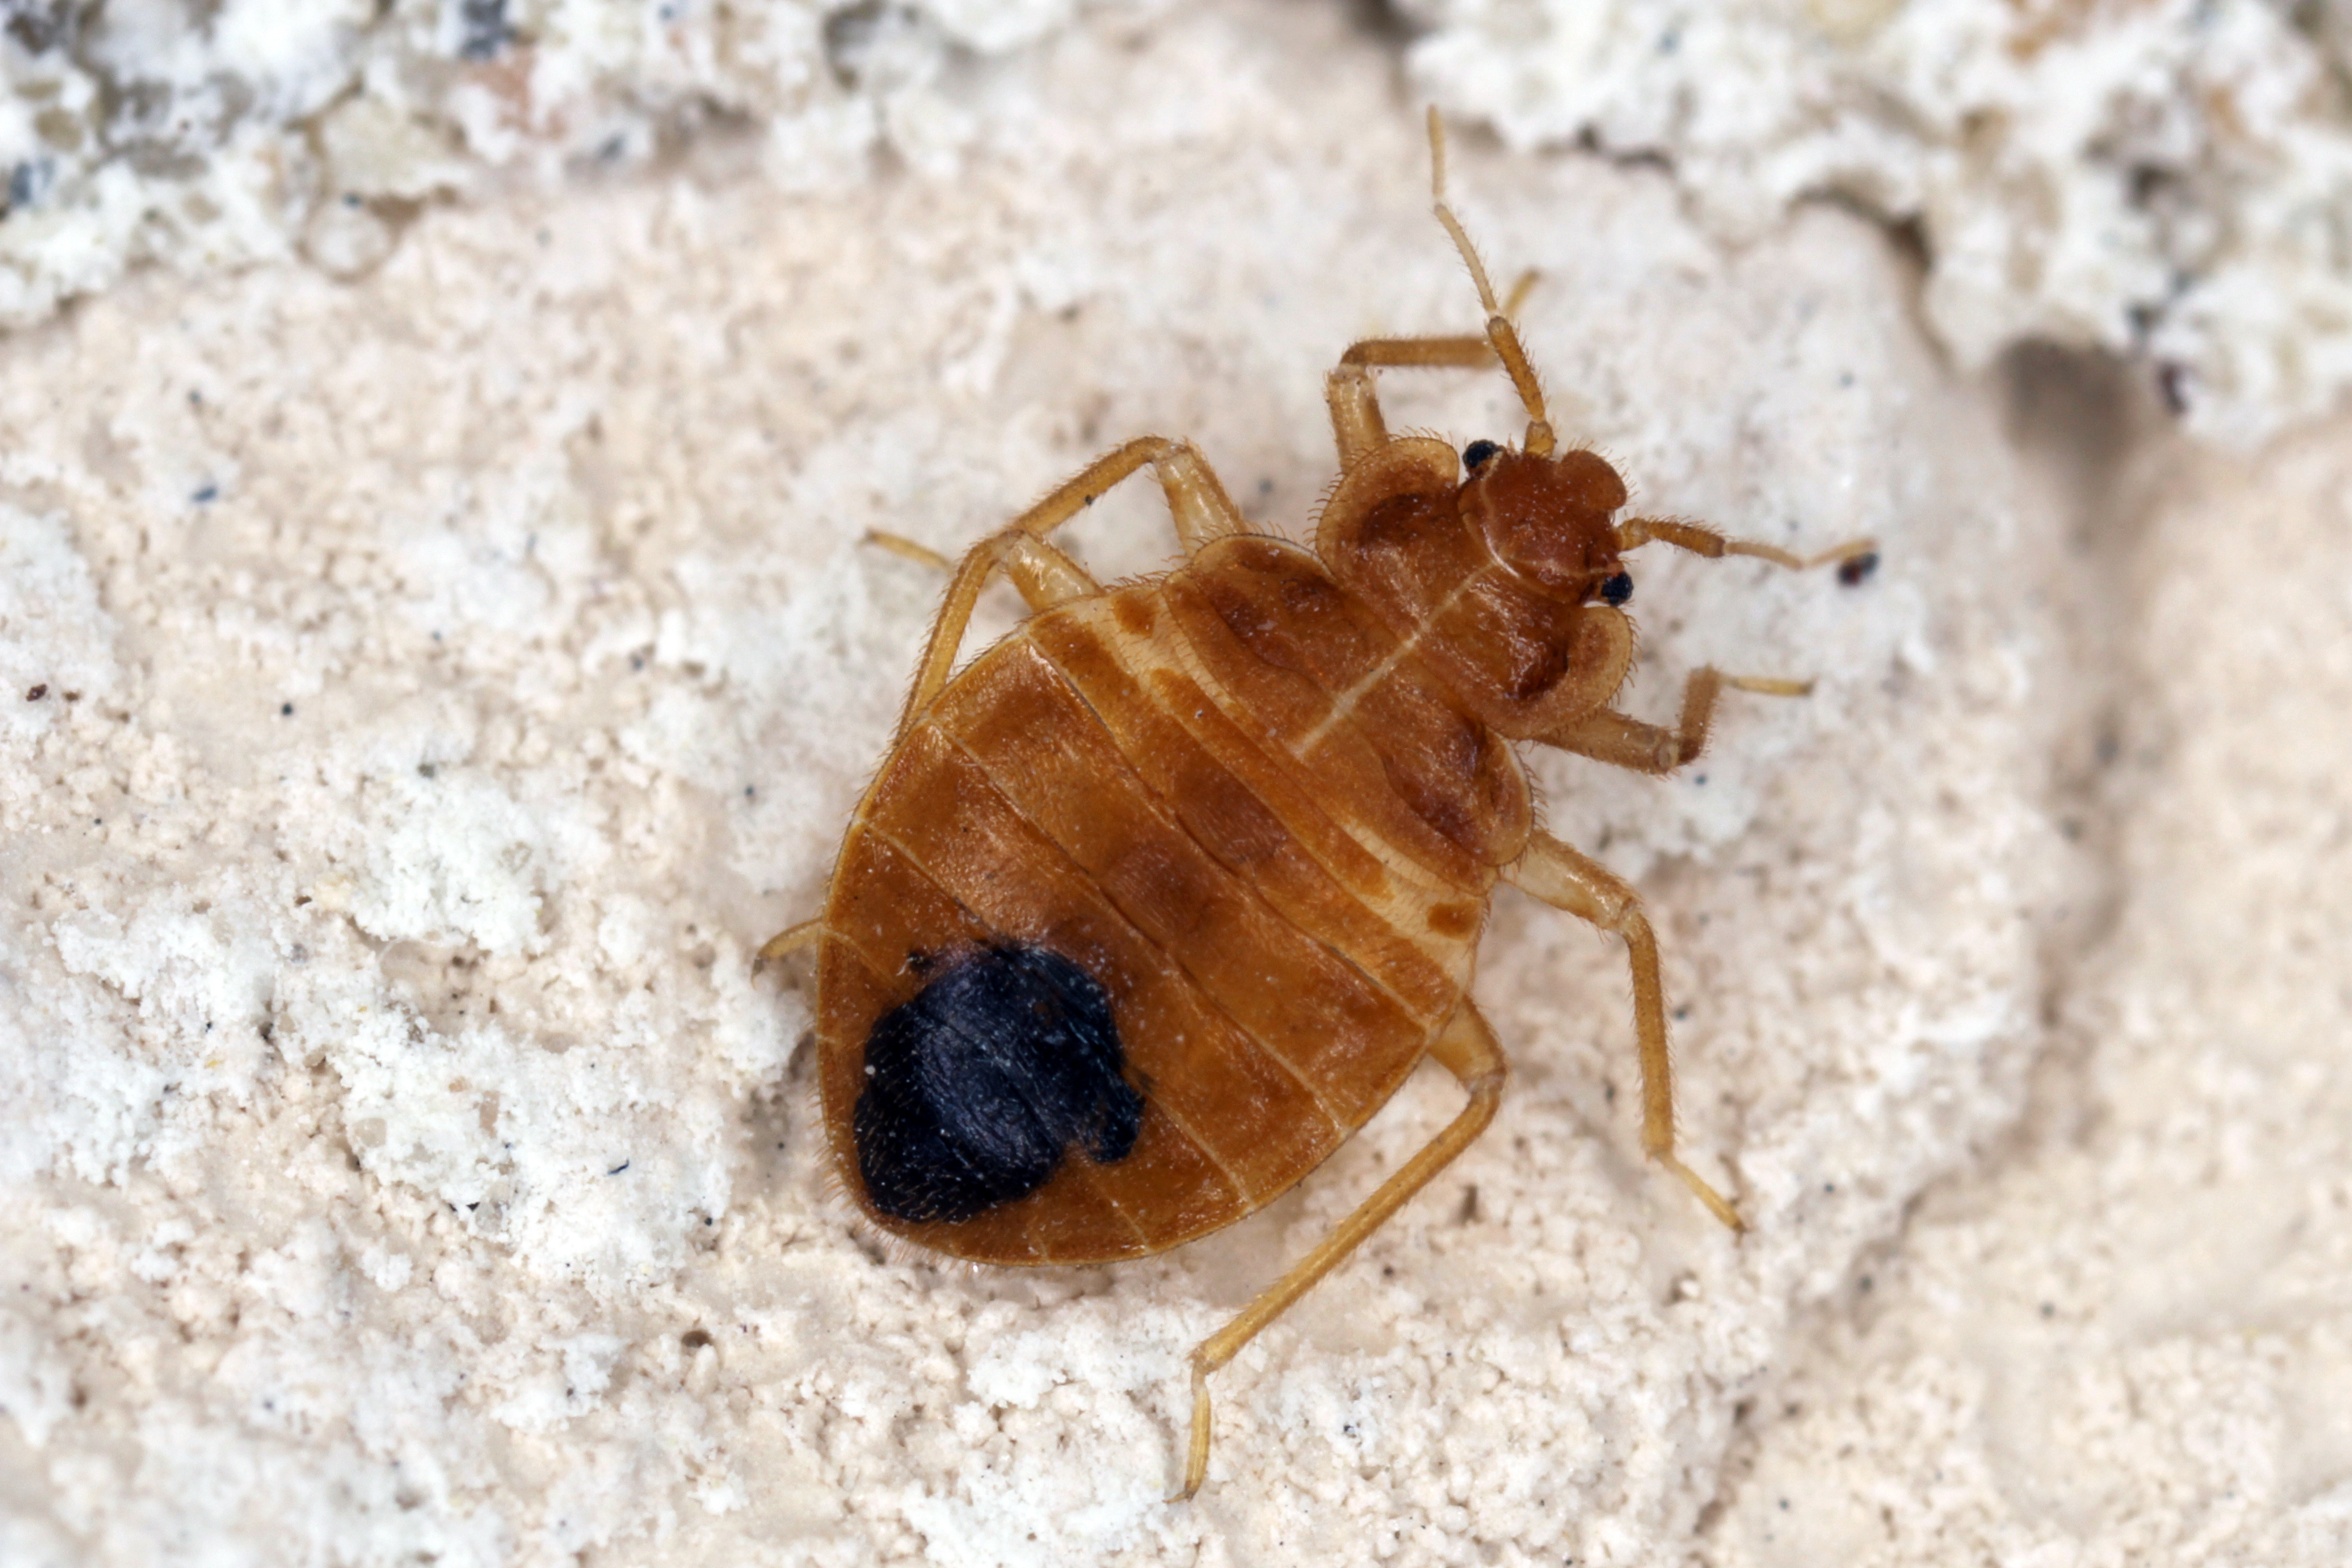 A close up shot of a bed bug - experience the best bed bug control in Hillsboro, TX with GGA Pest Management.